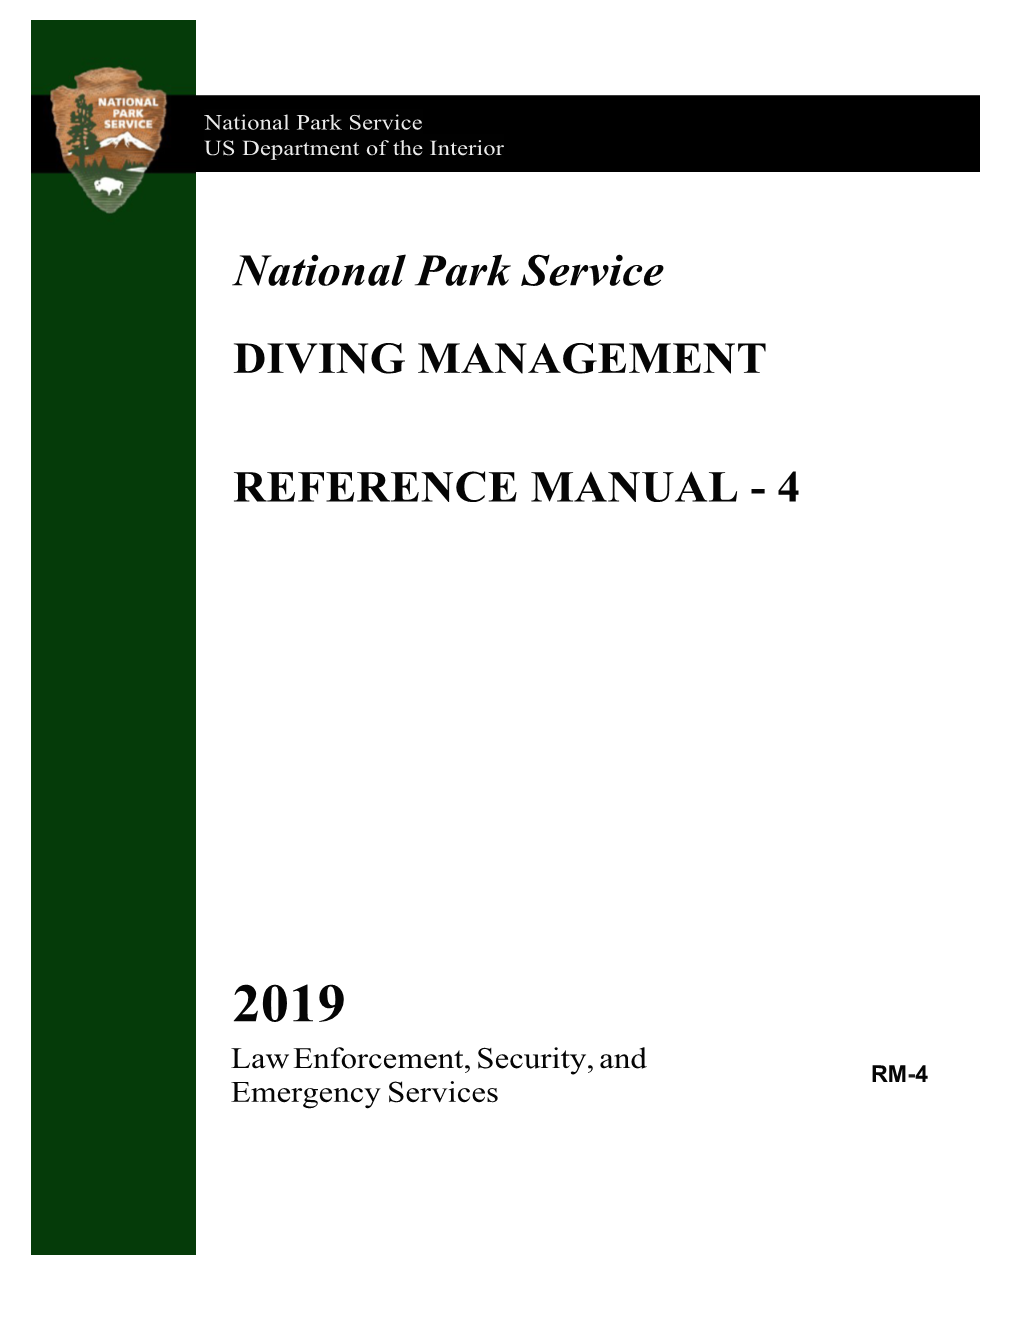 Reference Manual - 4